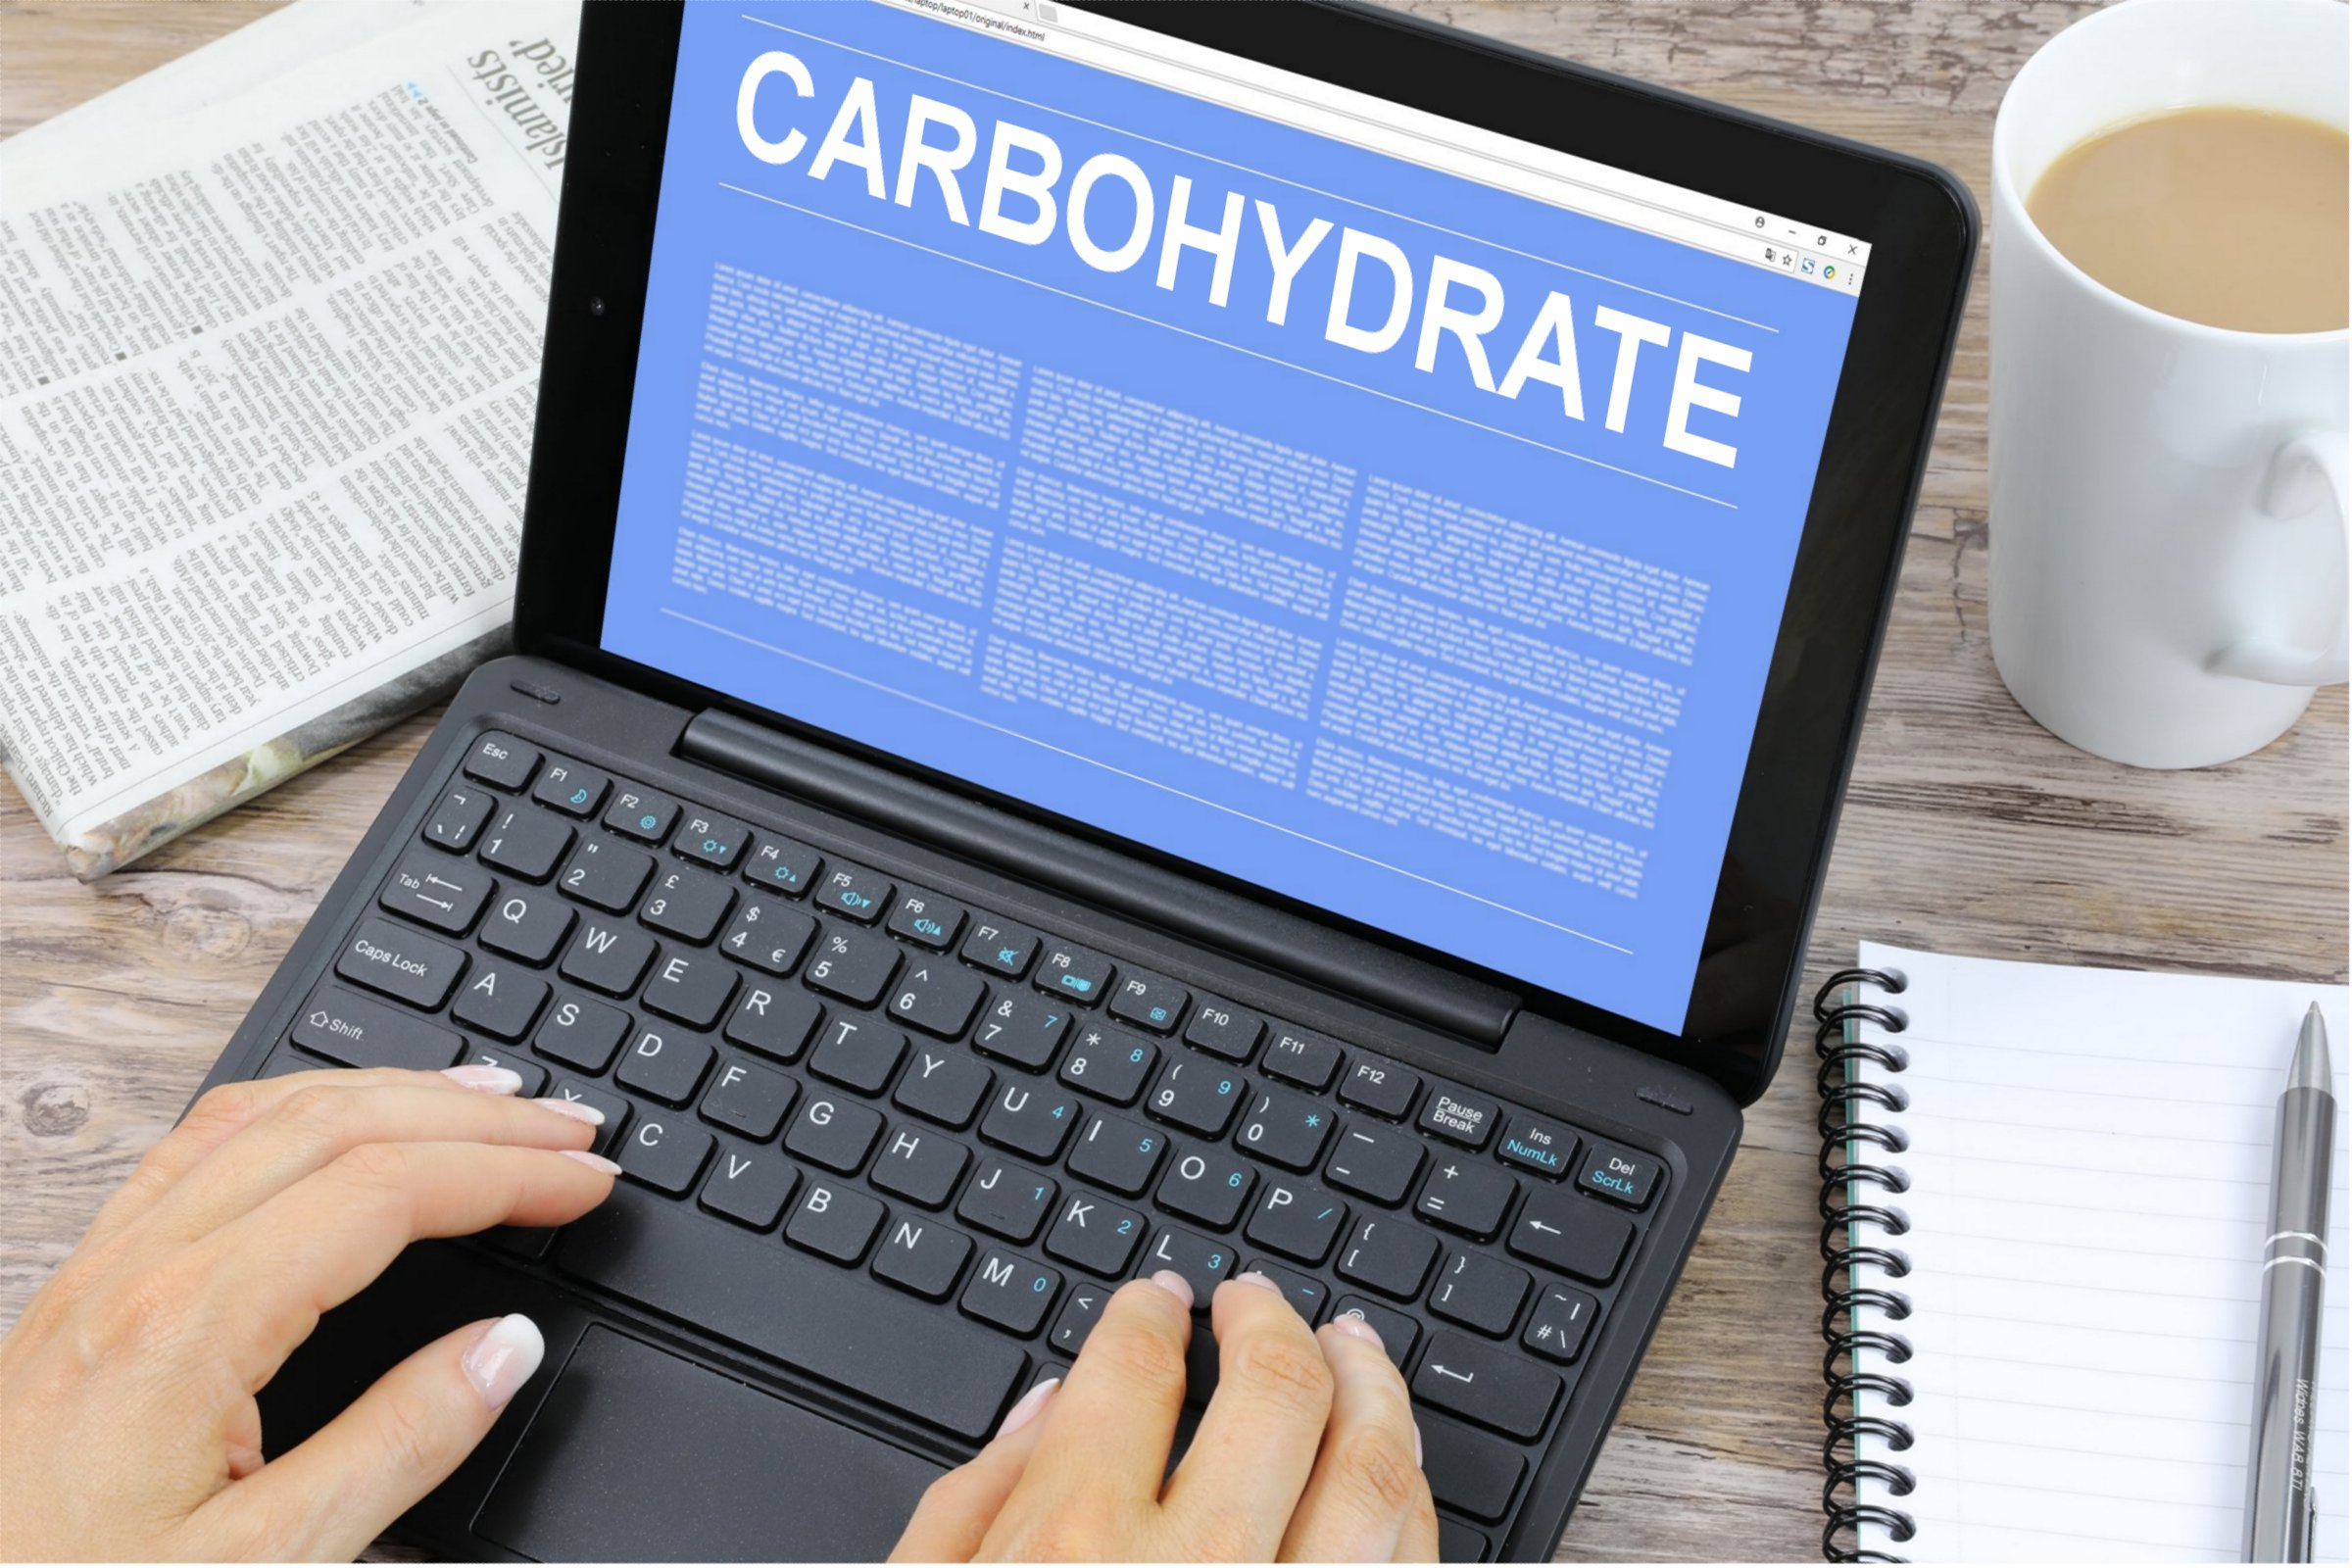 carbohydrate-free-of-charge-creative-commons-laptop-image